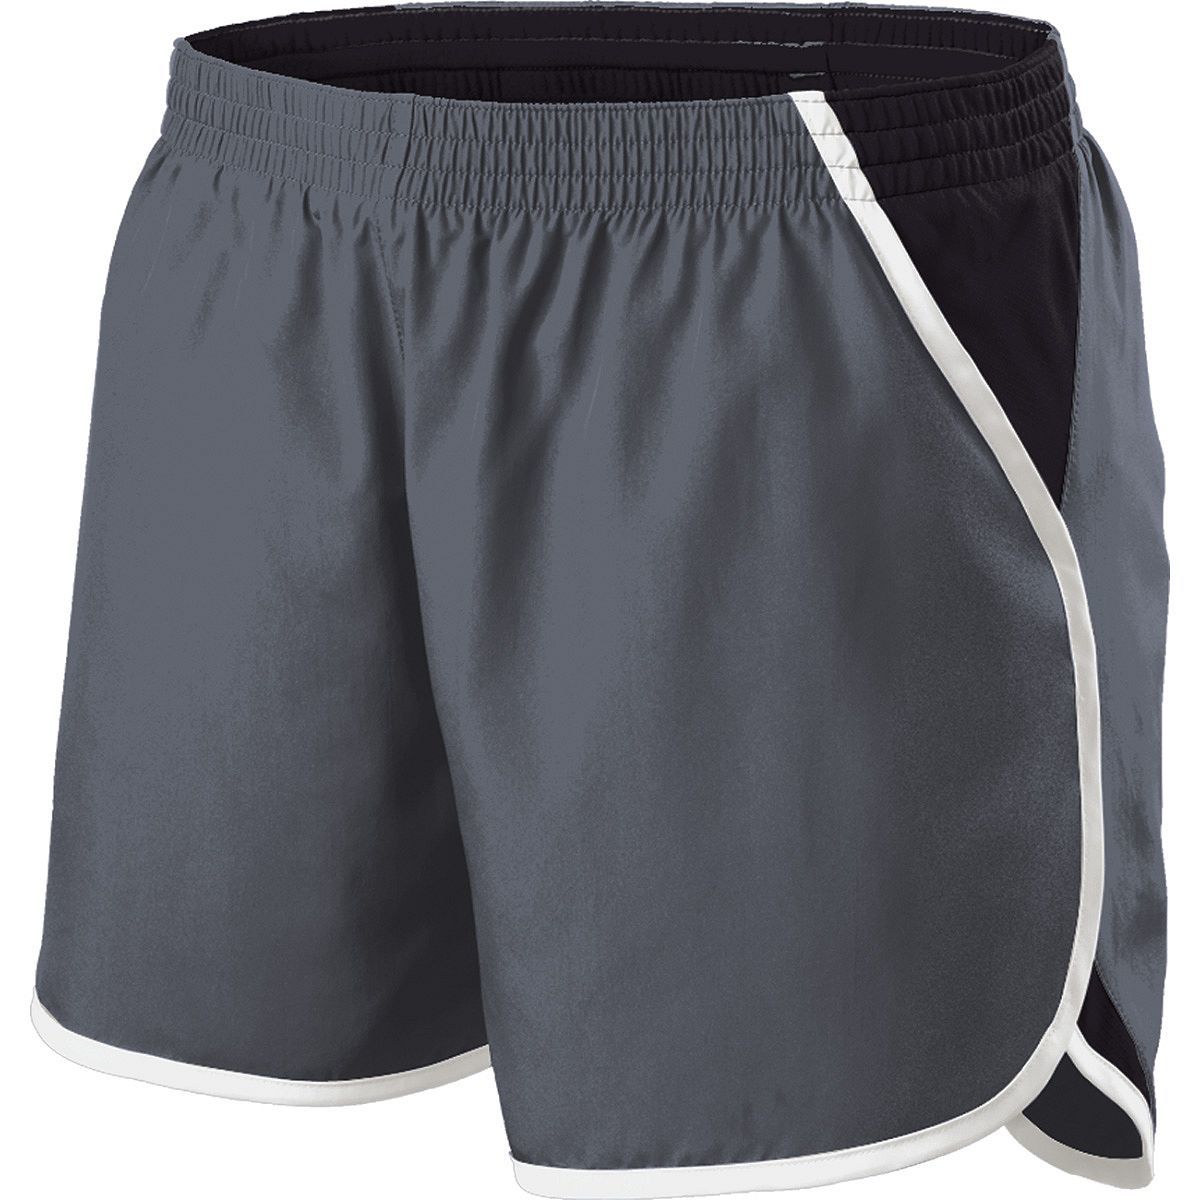 Holloway Energize Shorts in Graphite/Black/White  -Part of the Ladies, Ladies-Shorts, Holloway product lines at KanaleyCreations.com